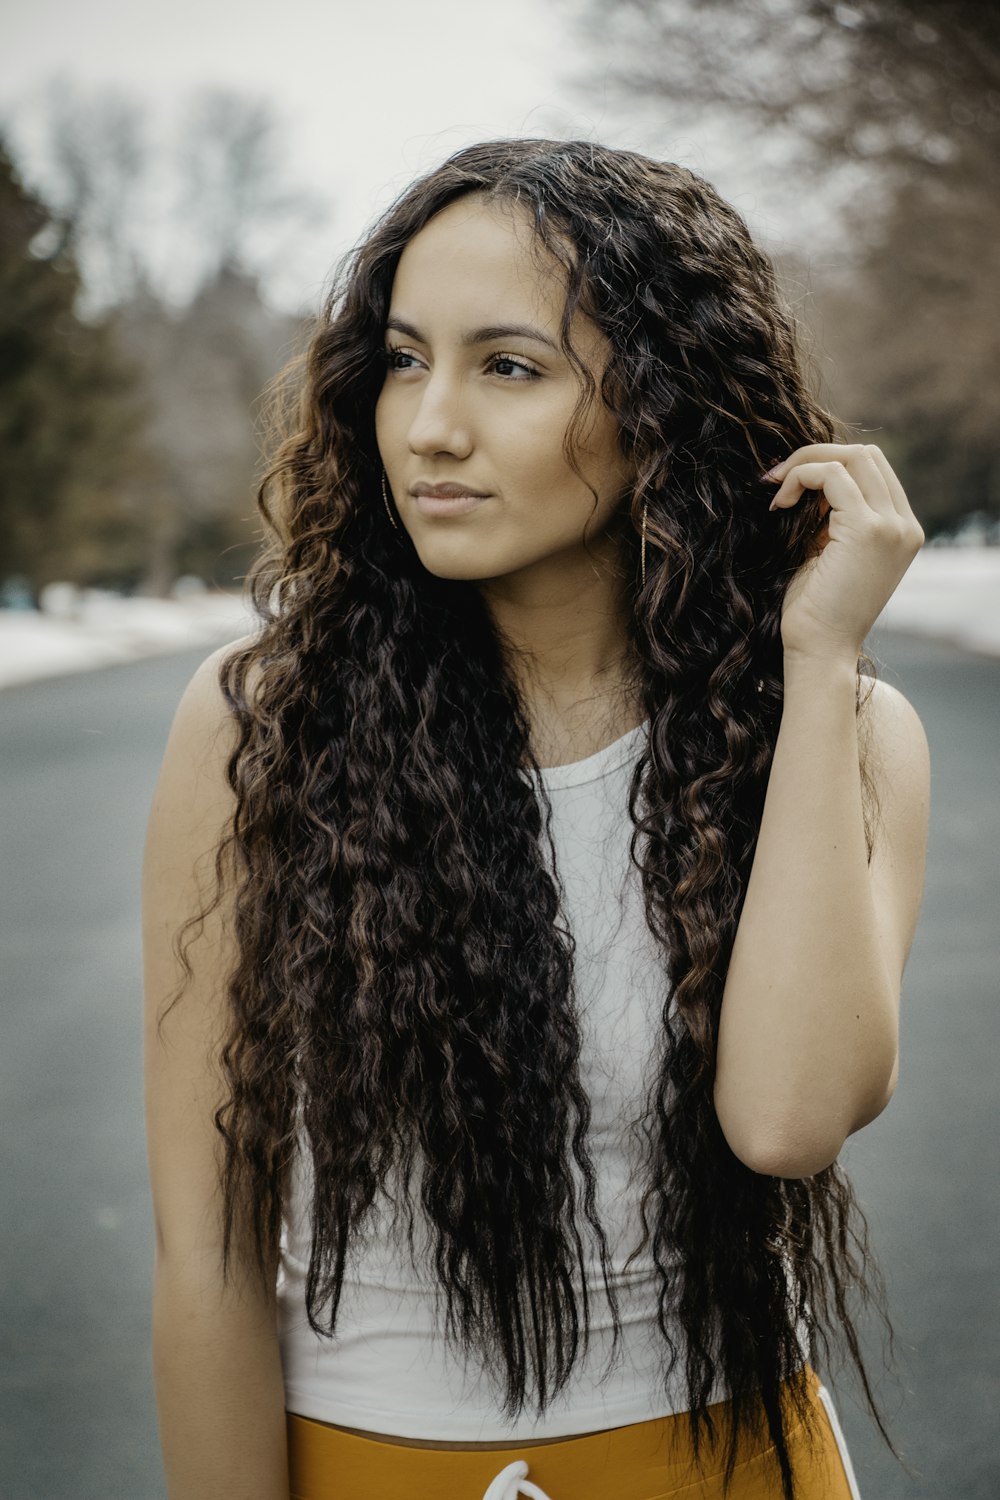 a woman with long curly hair standing in the street